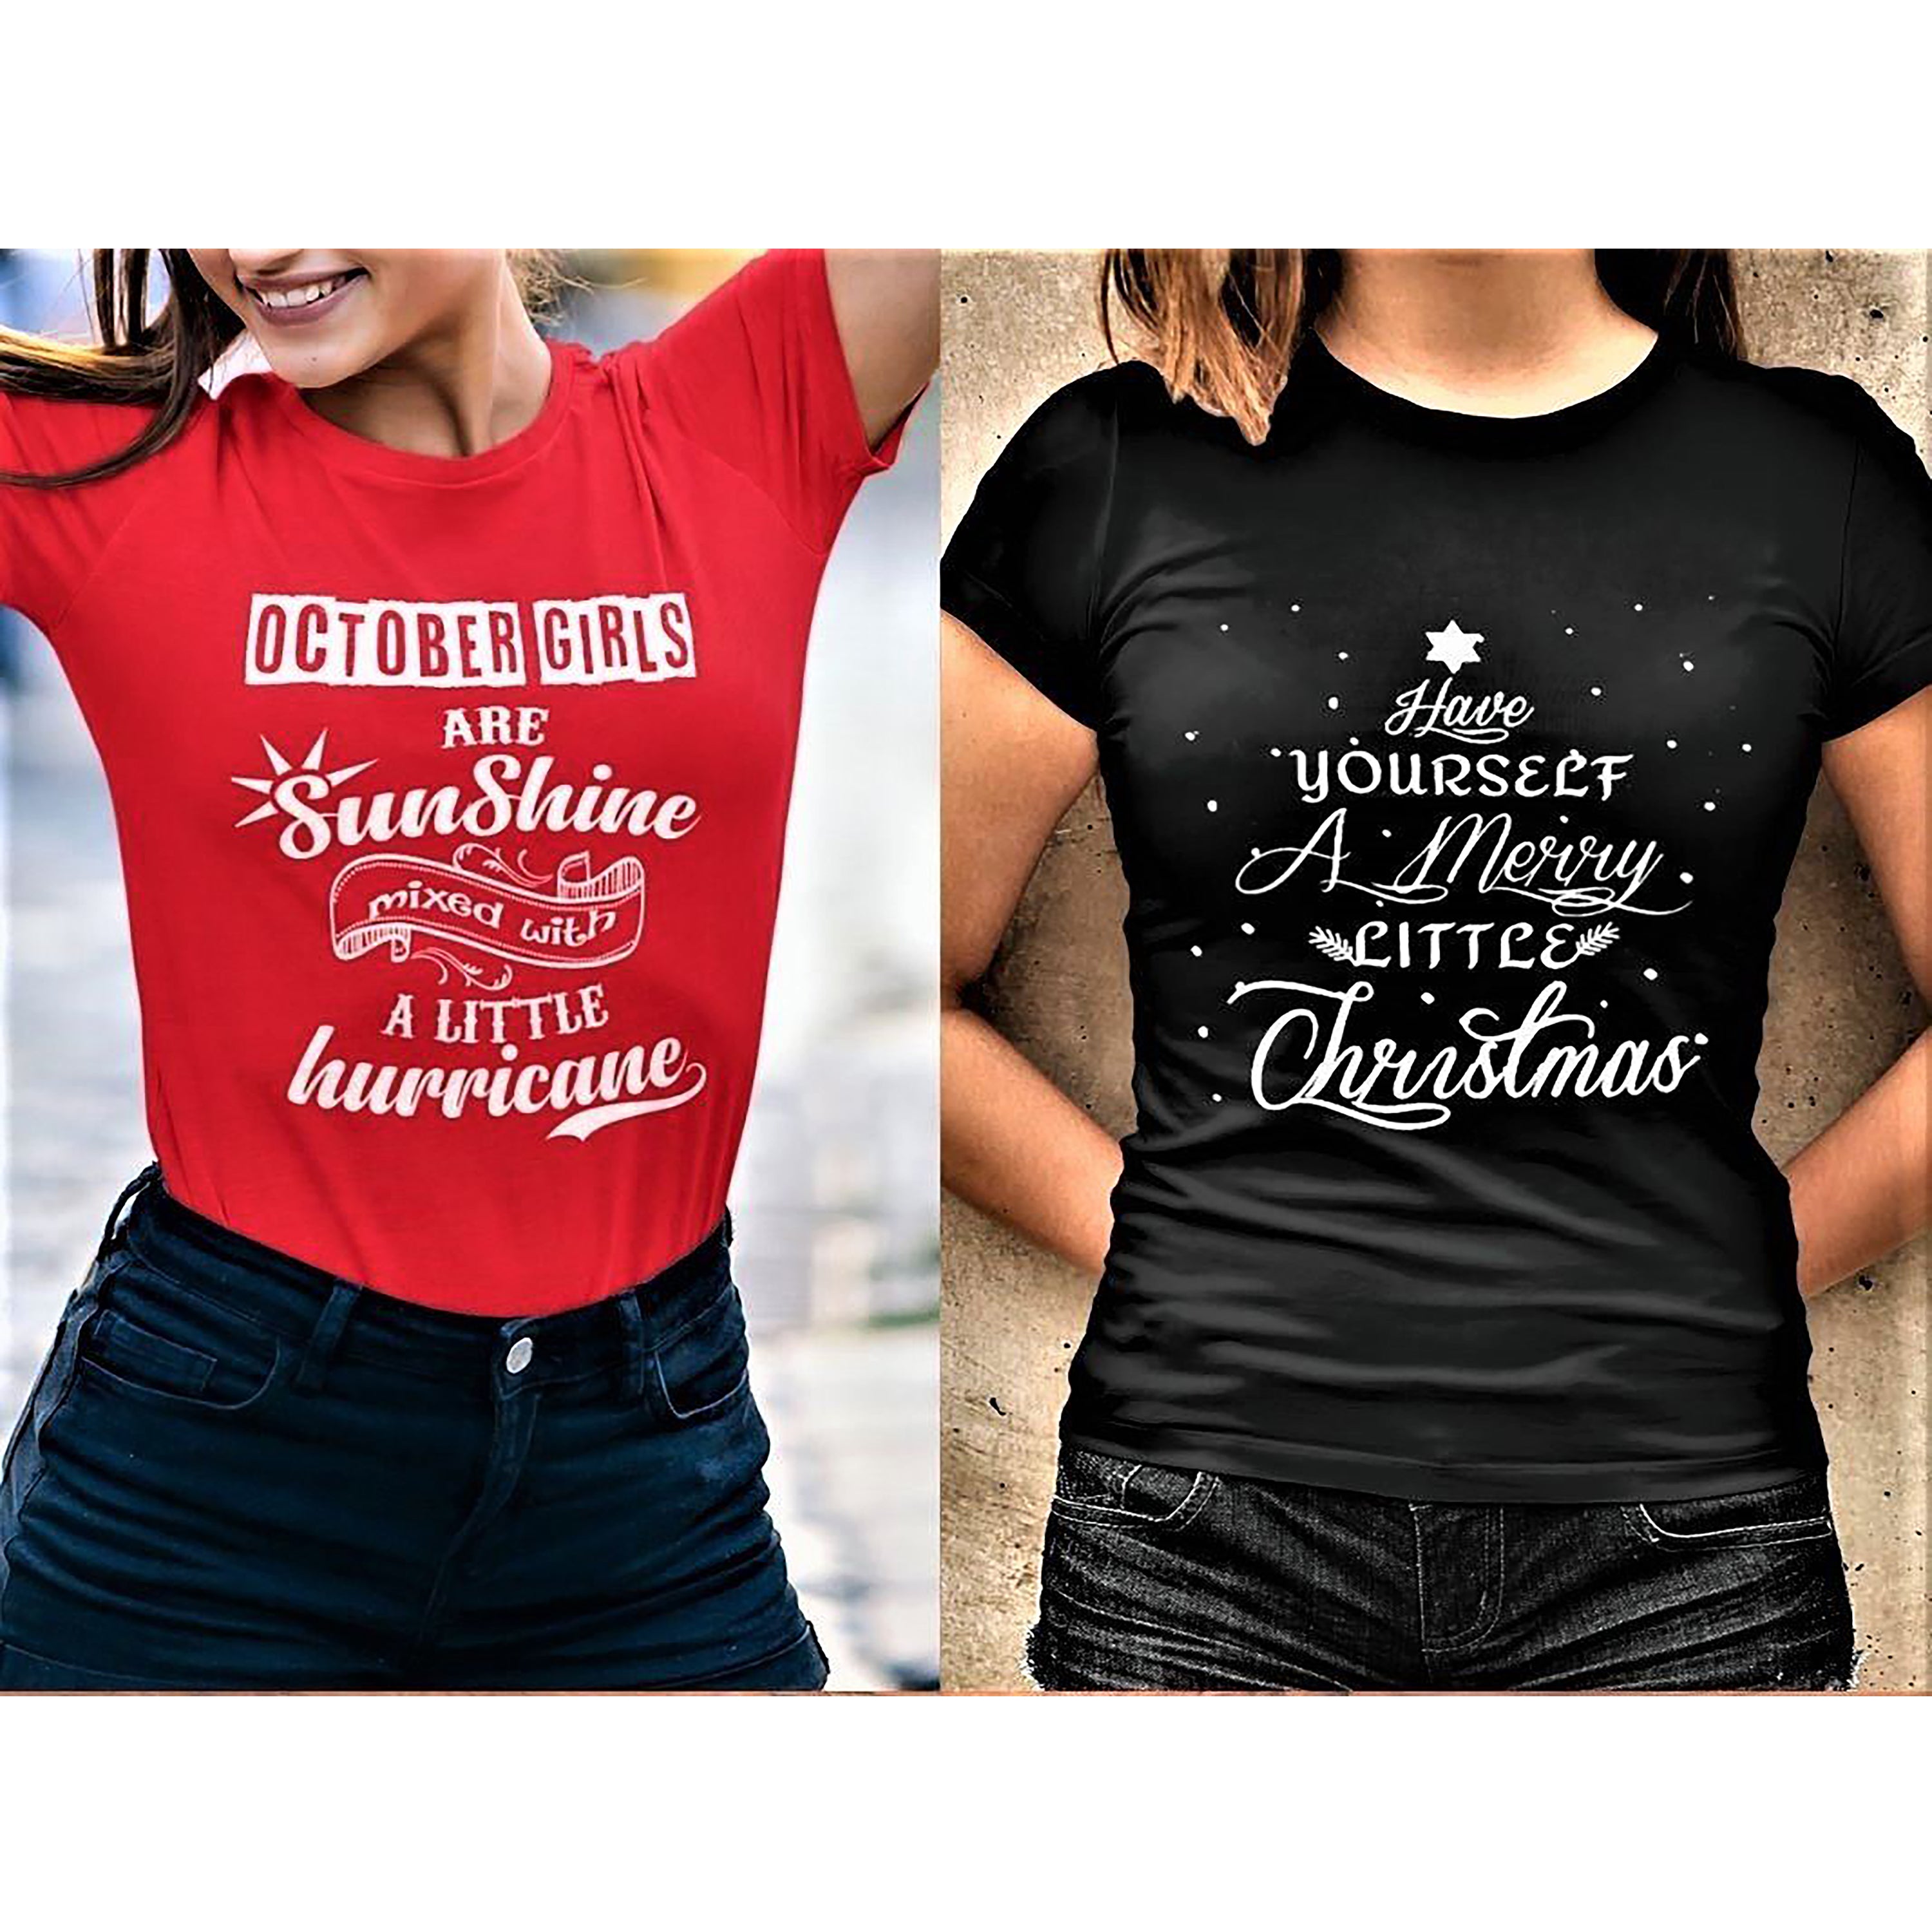 "2 Awesome Designs Combo- October Sunshine + Merry Little Christmas".